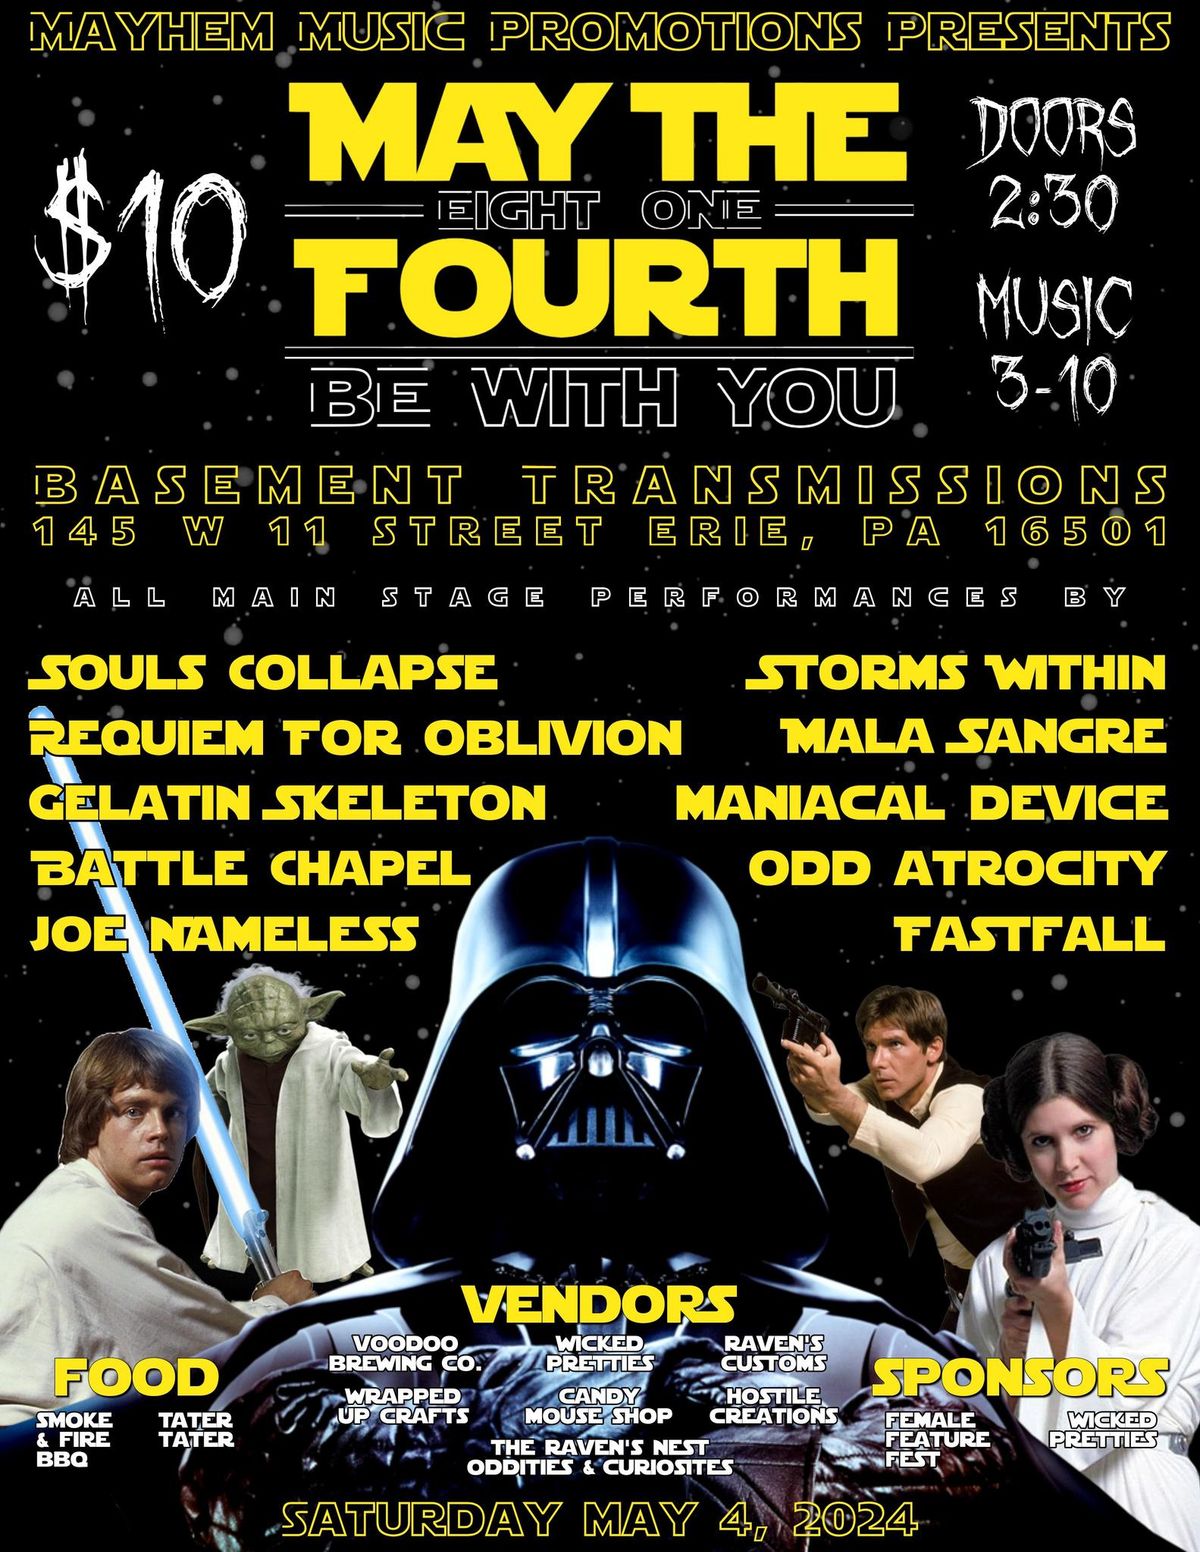 Mayhem Music Presents MAY THE 814th BE WITH YOU FEST